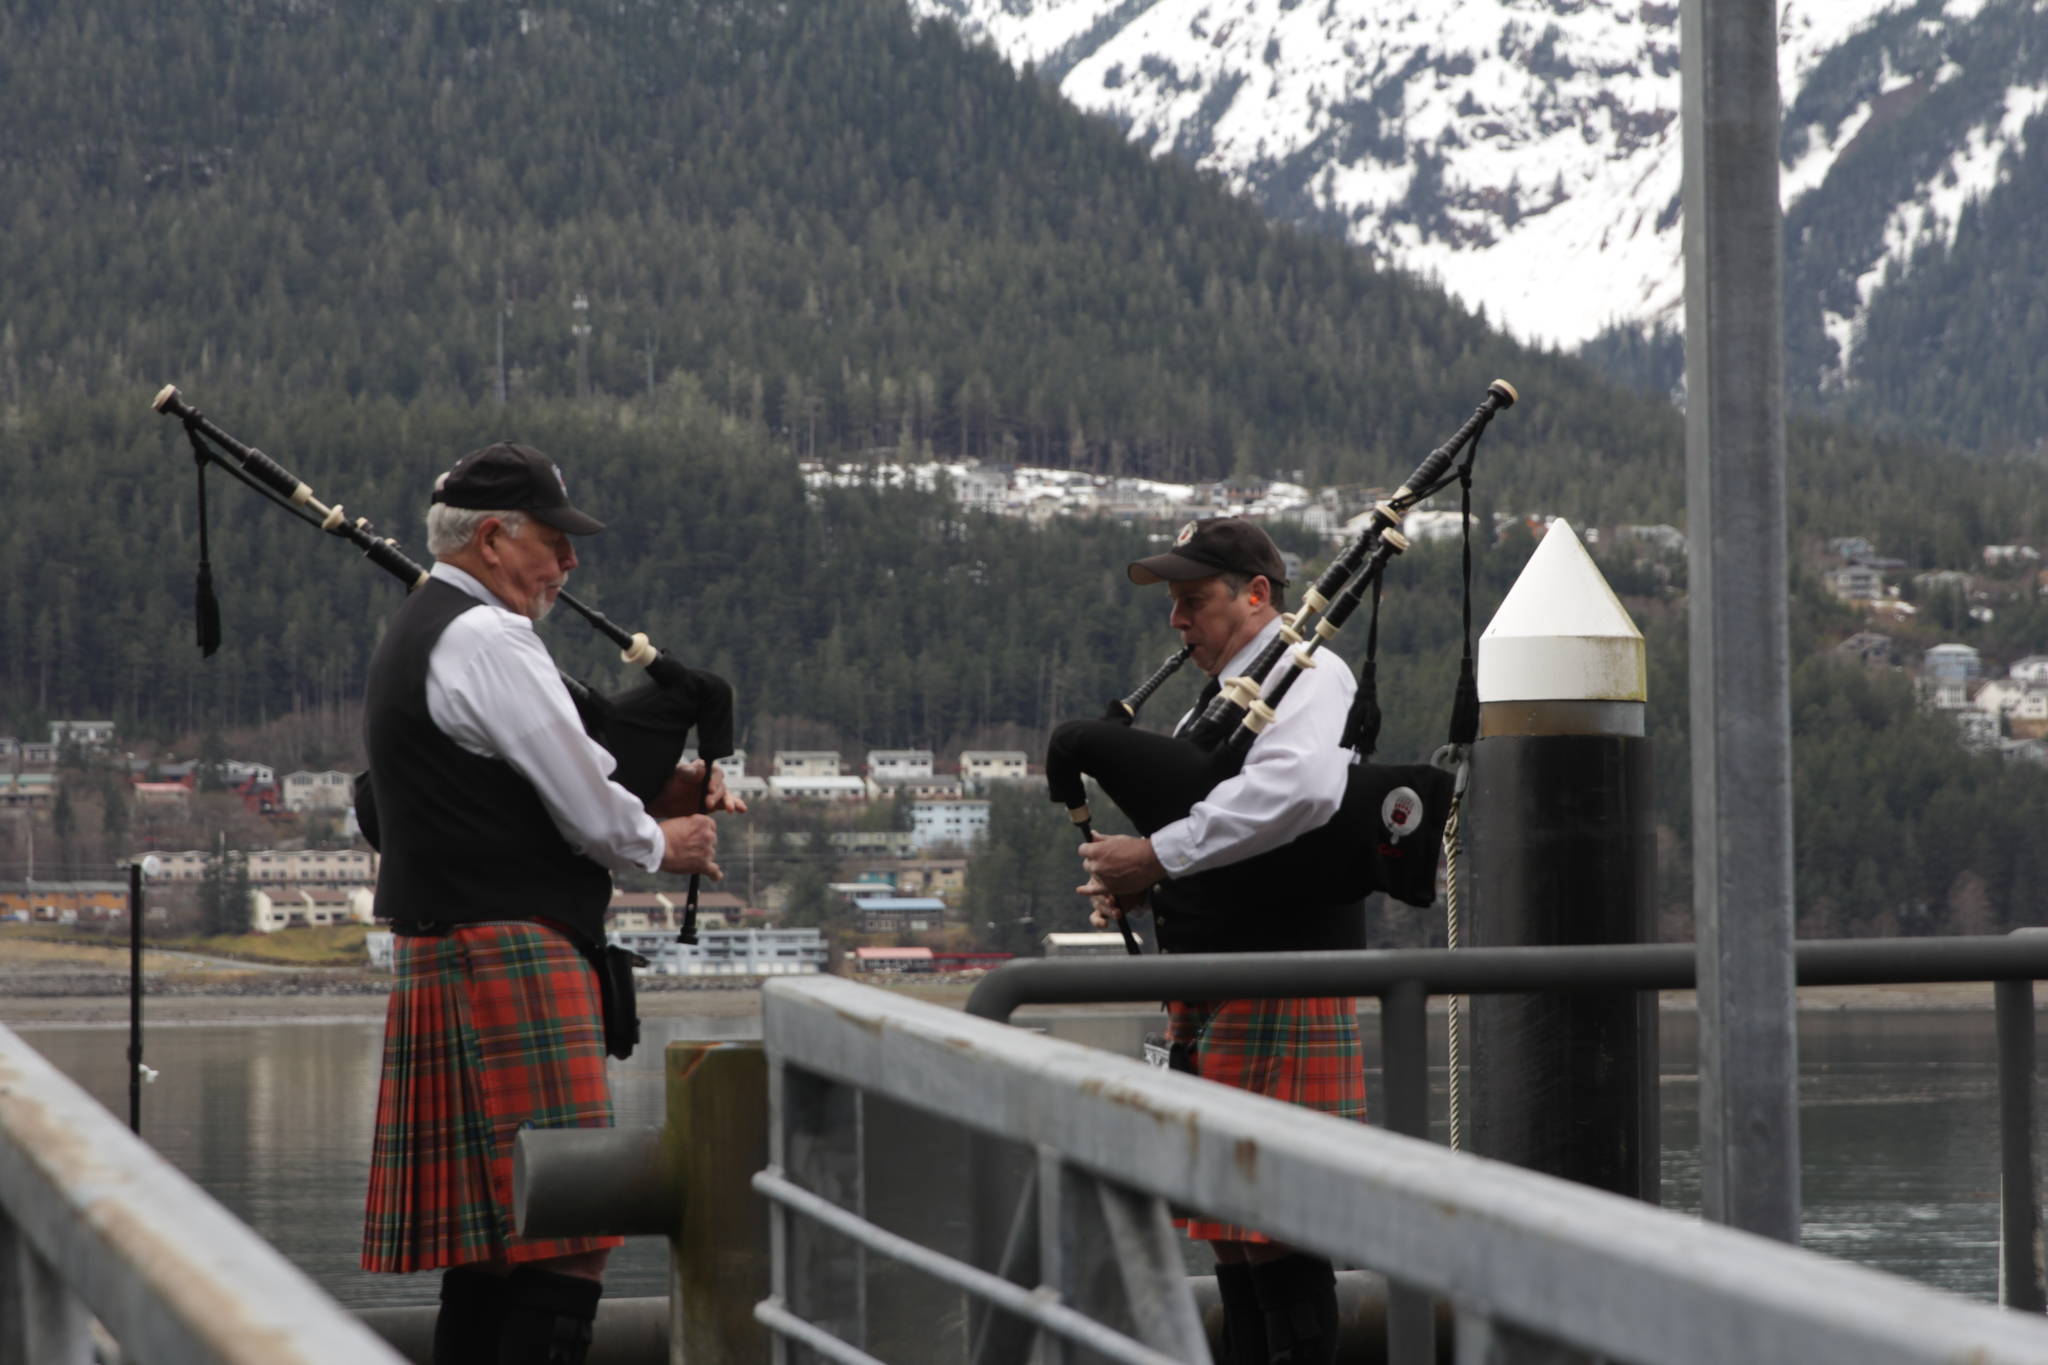 Members of the City of Juneau Pipe Band play their bagpipes during the 31st annual Blessing of the Fleet and Reading of Names at the Alaska Commercial Fishermen’s Memorial in Juneau on May 1, 2021. (Michael S. Lockett / Juneau Empire)